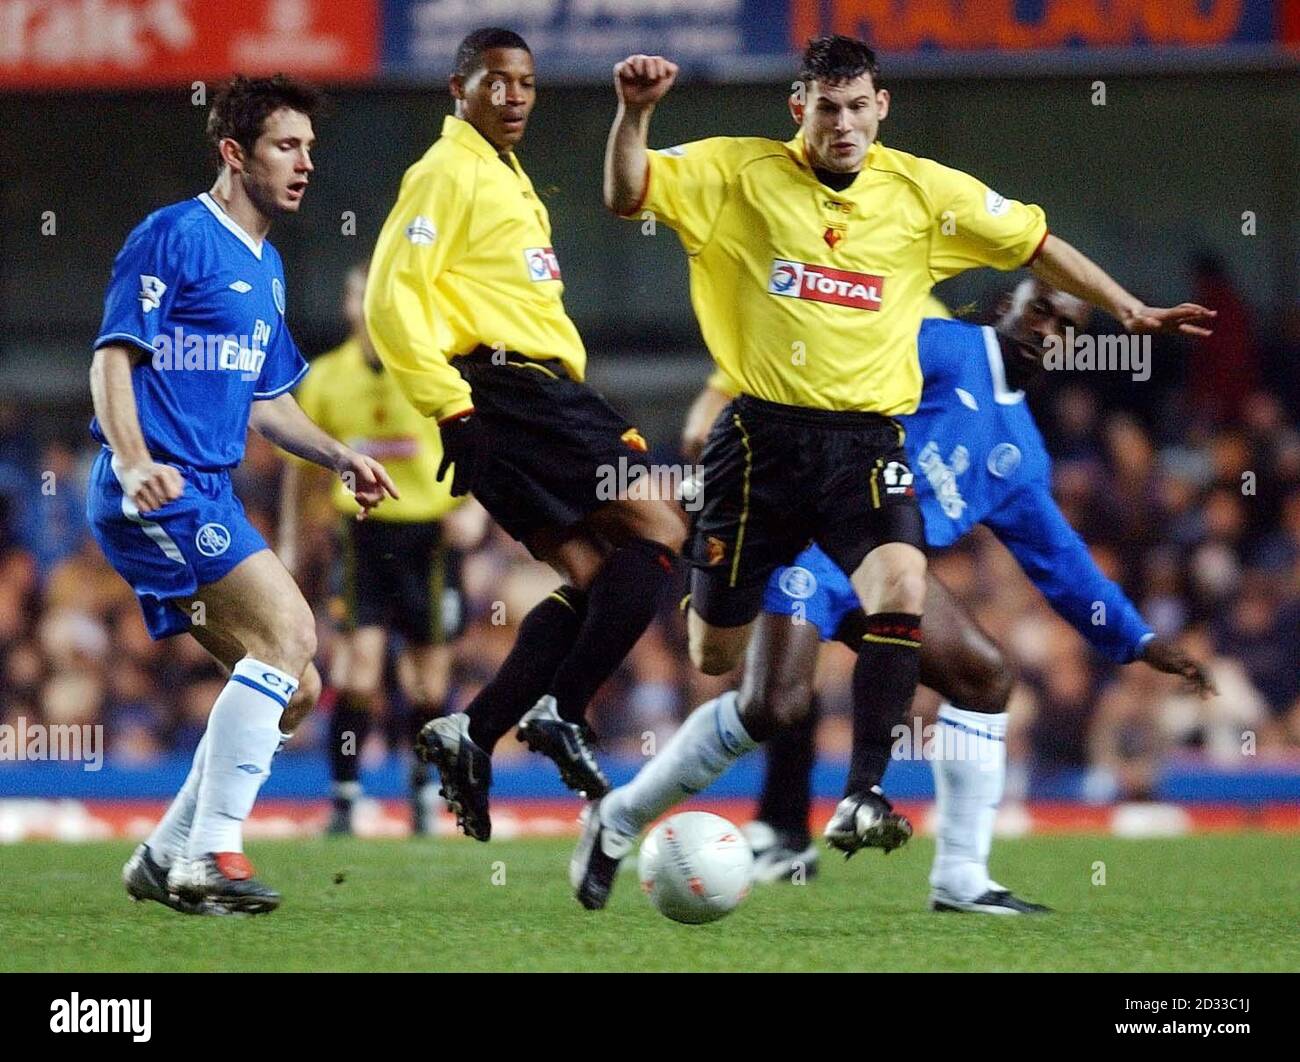 Watfords Jamie Hand forces the ball forward against Chelsea, during their  FA Cup Third Round Replay match at Stamford Bridge, Chelsea. THIS PICTURE  CAN ONLY BE USED WITHIN THE CONTEXT OF AN